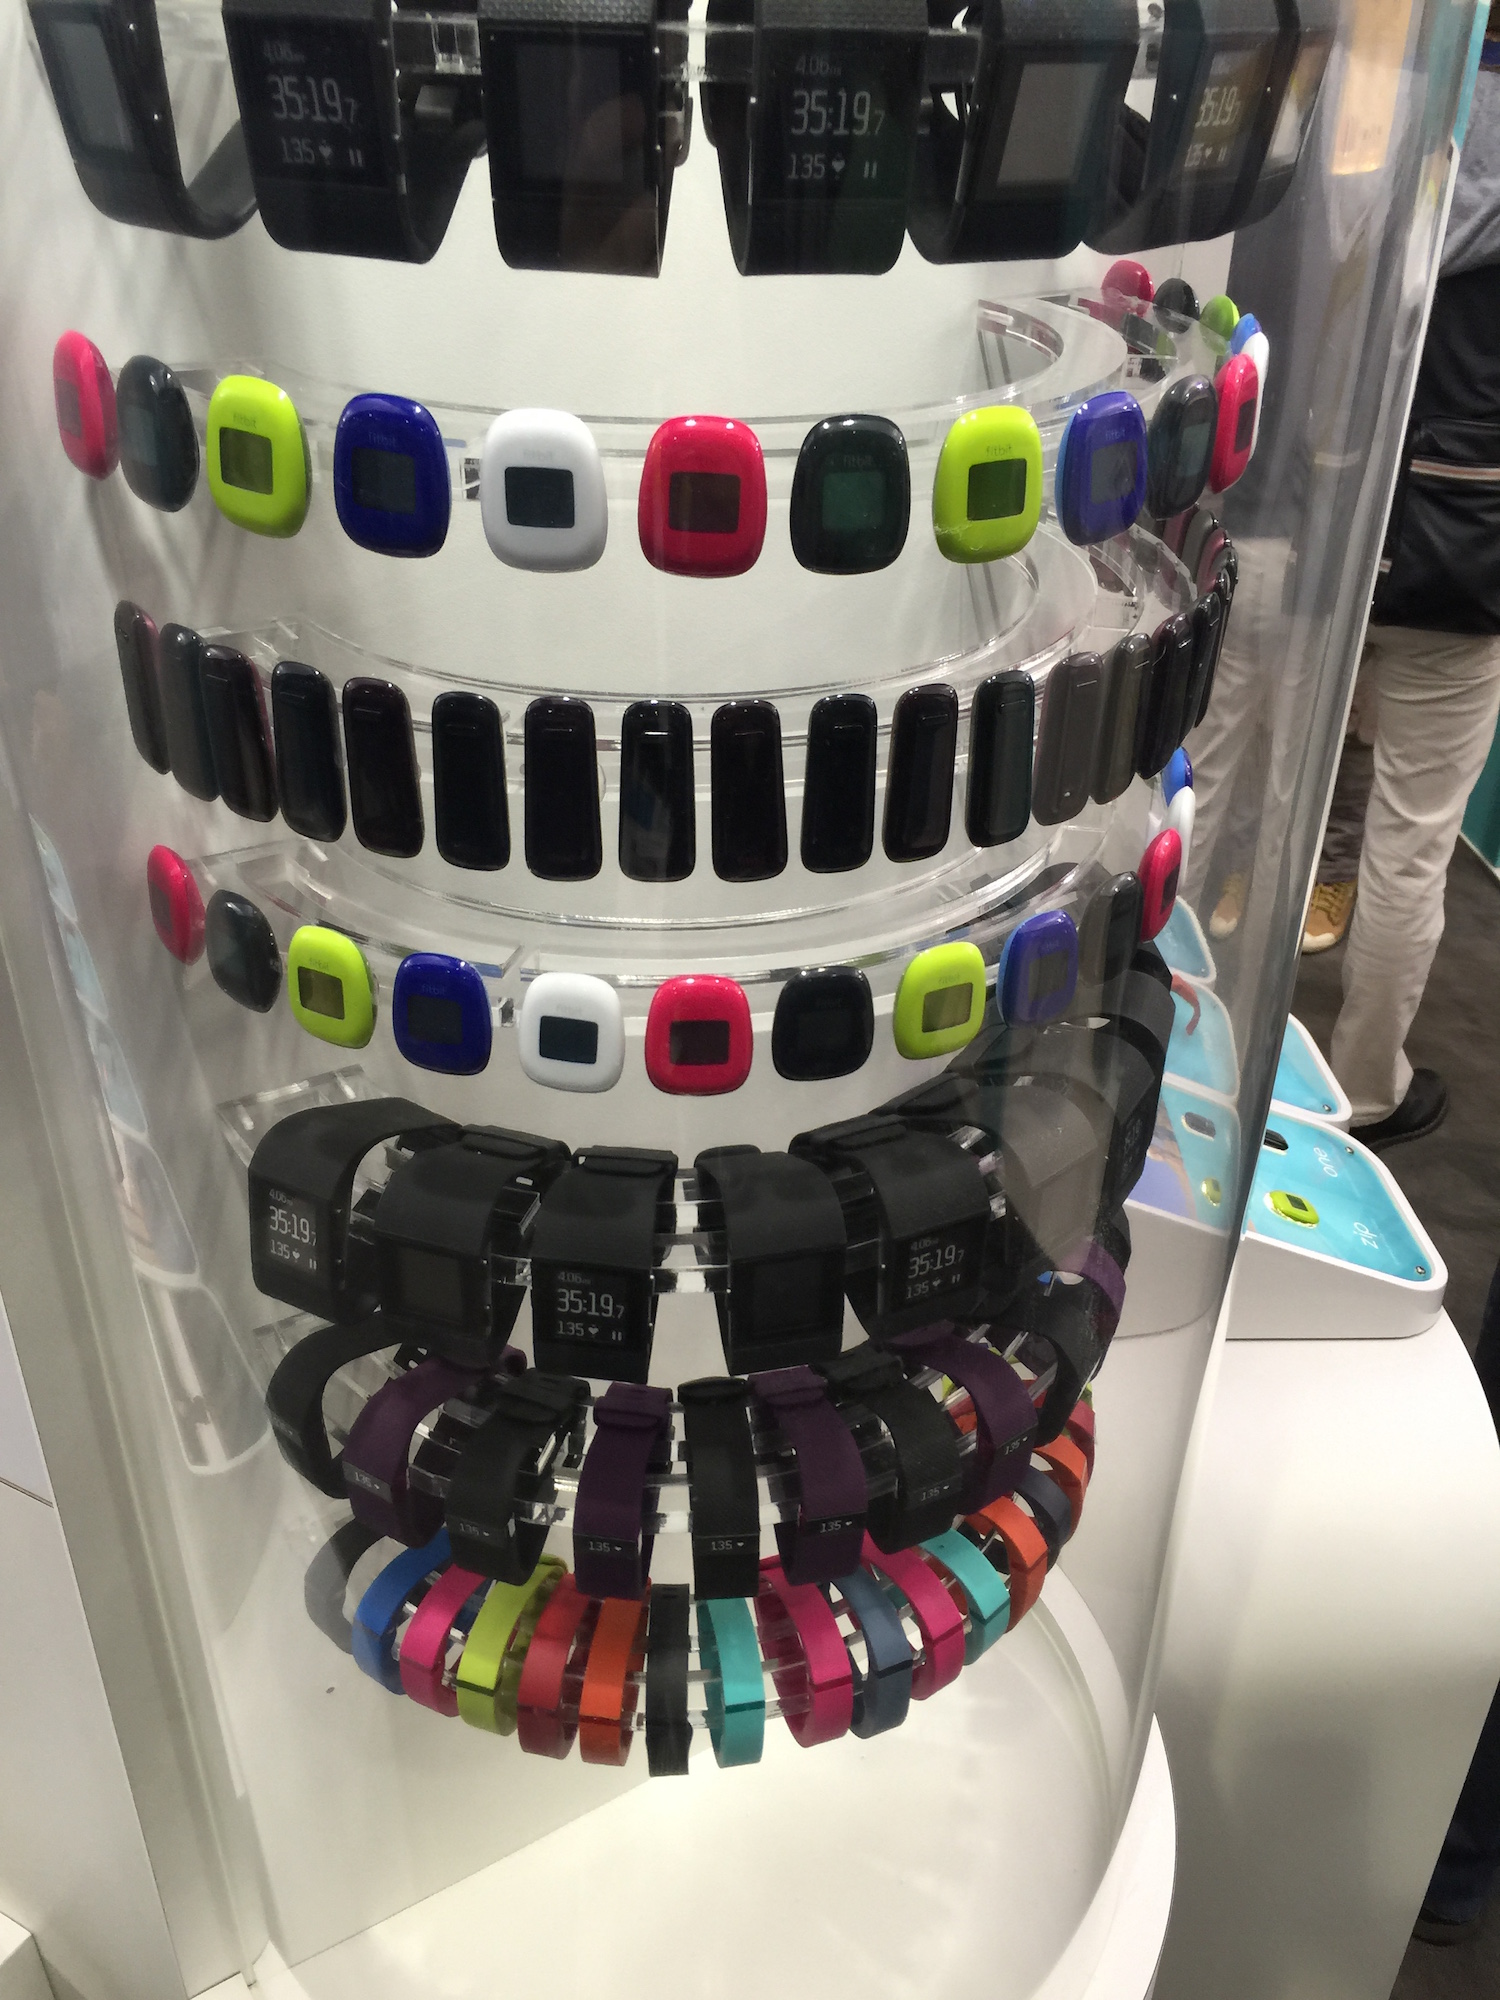 Fitbit at CES 2015